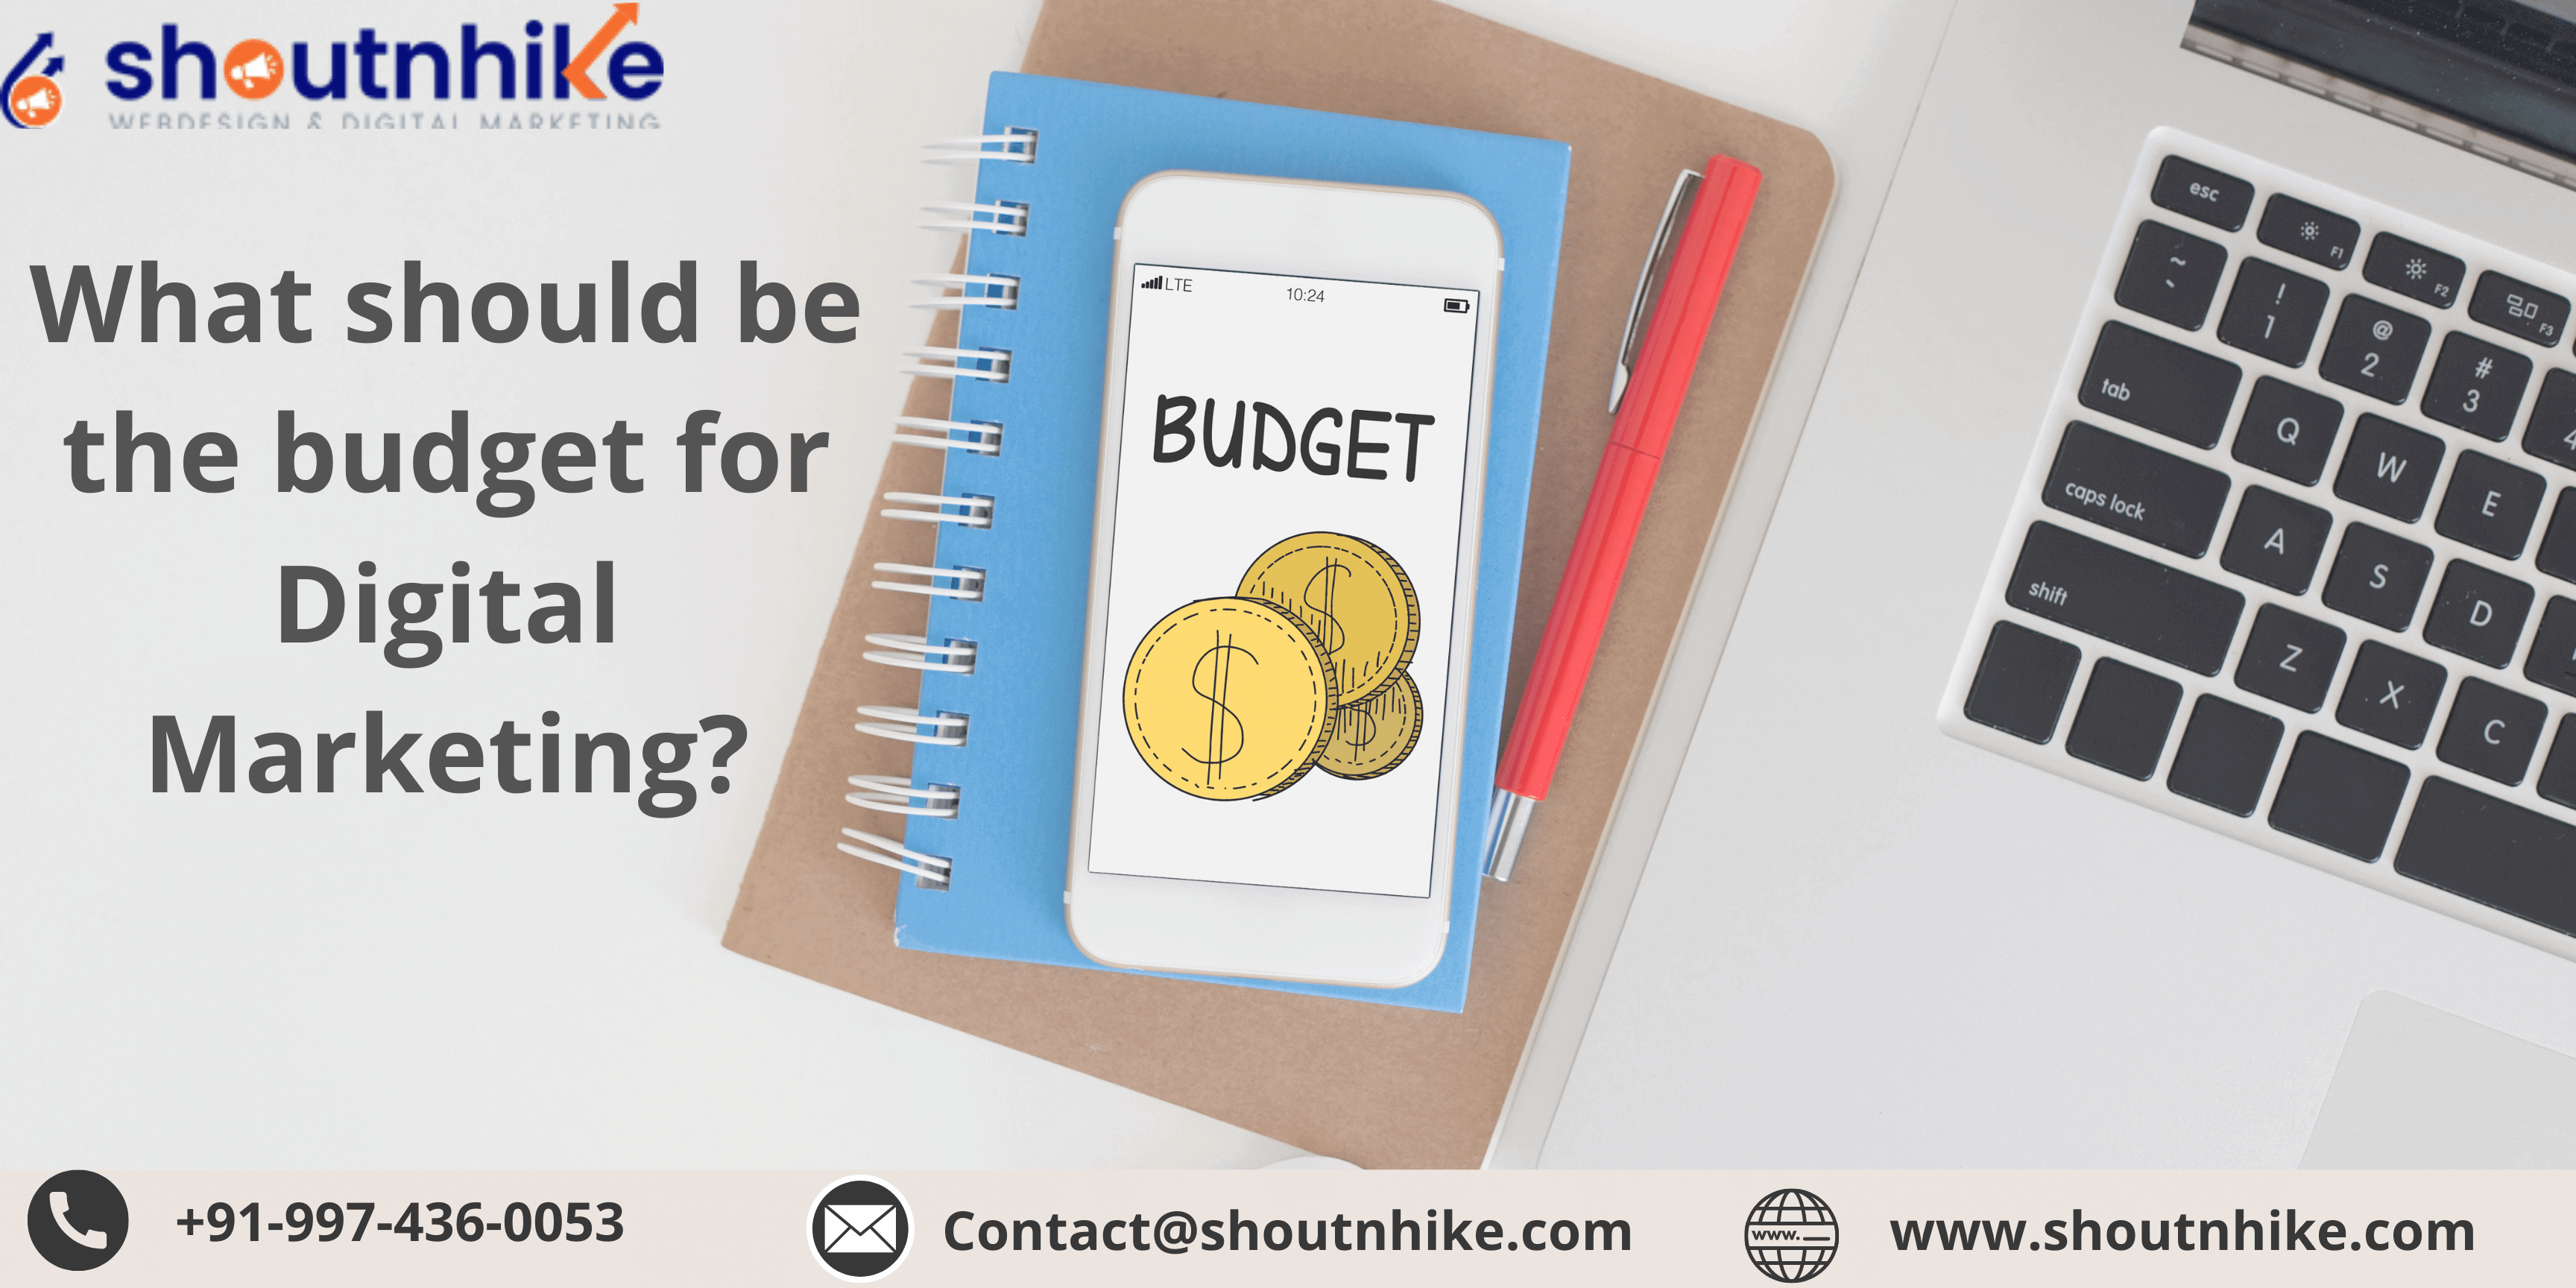 What should be the budget for Digital Marketing